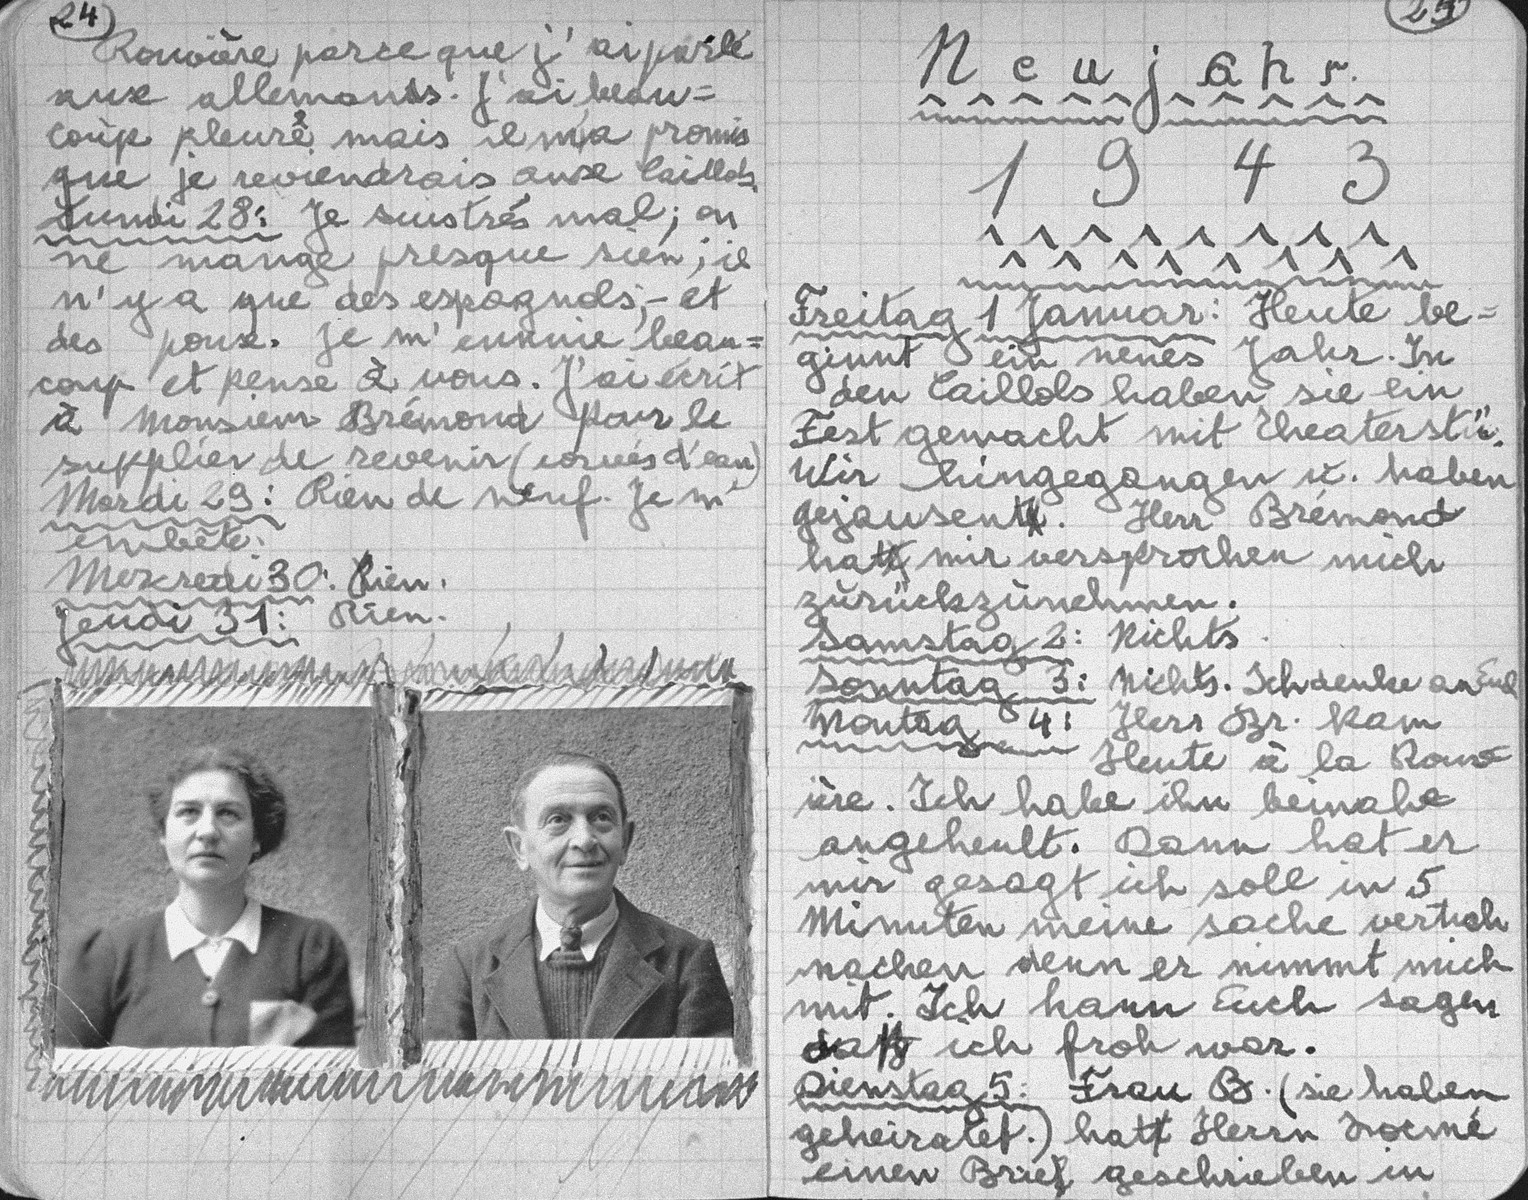 One page of a journal kept by Klaus Peter (later Pierre) Feigl, an Austrian/German Jewish refugee child living in France during World War II.  

The page at the left includes pasted in photographs of the diarist's parents, Ernst and Agnes Feigl, who perished during the war.  The page at the right is dated "New Year 1943."